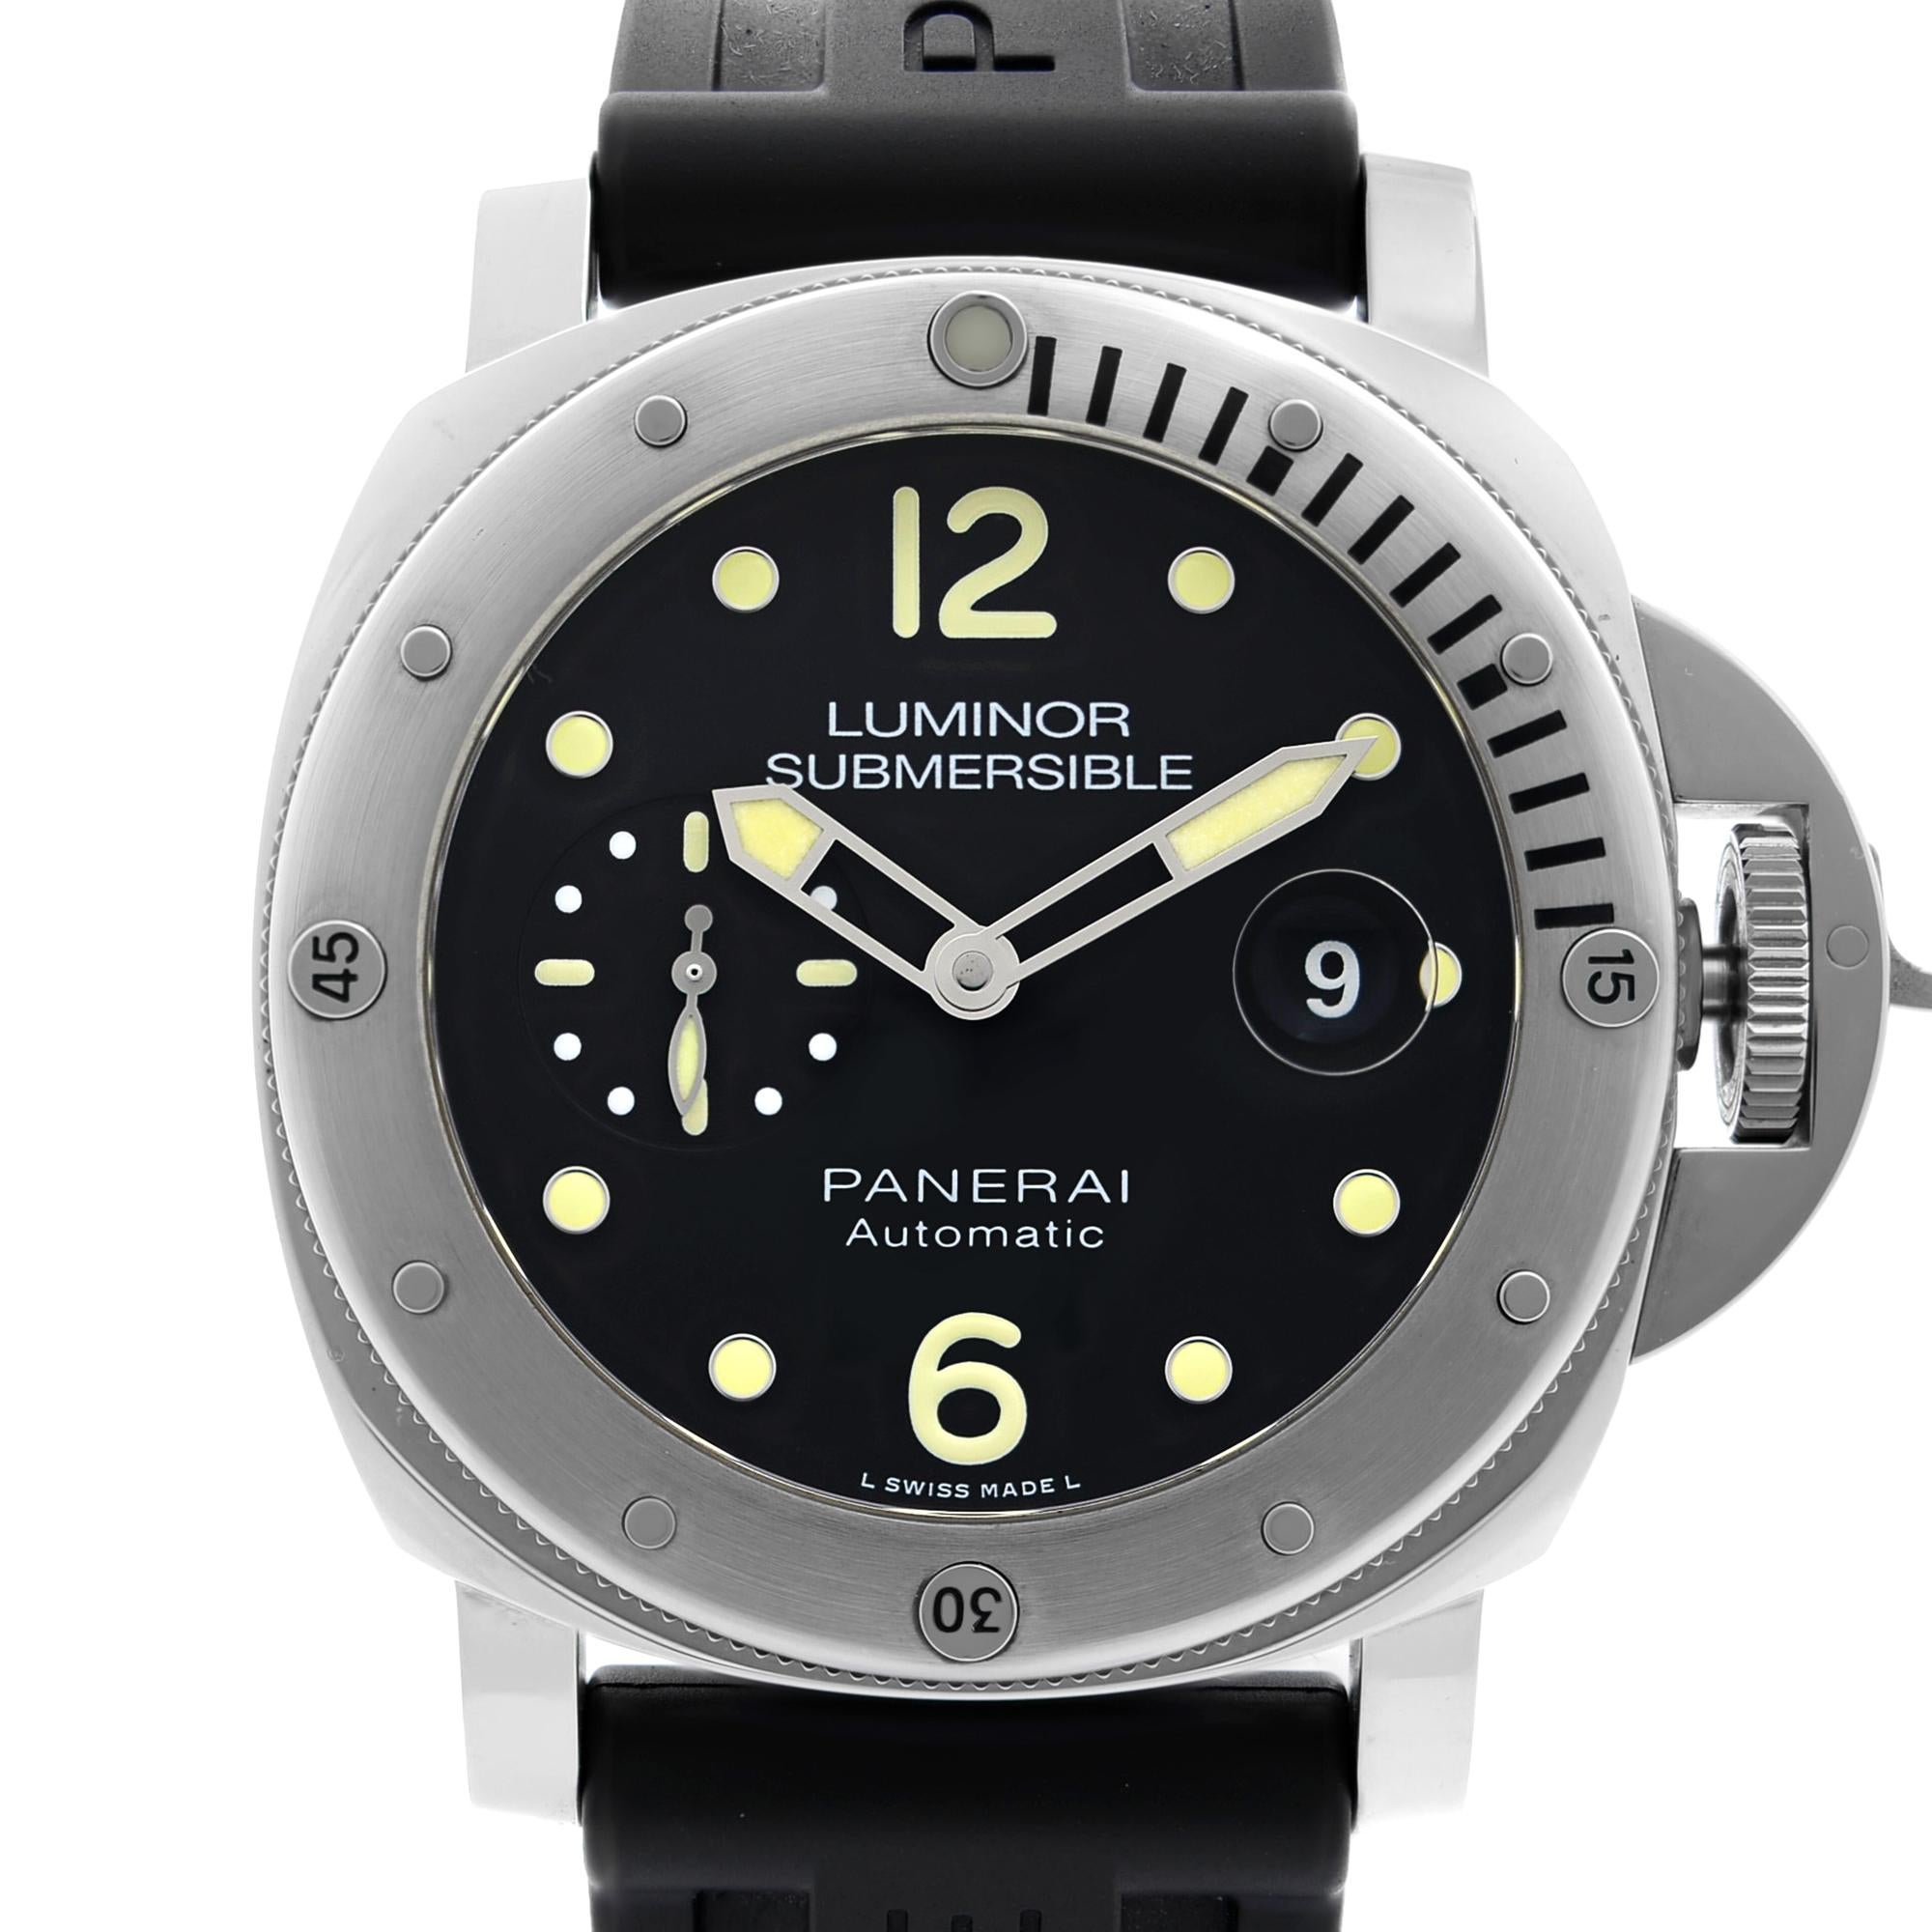 Excellent Pre-owned Like new Condition Panerai Luminor Submersible Steel Black Dial Automatic Men's Watch. Original Box and Papers are Included. 

Details:
Brand Panerai
Department Men
Model Number PAM01024
Country/Region of Manufacture